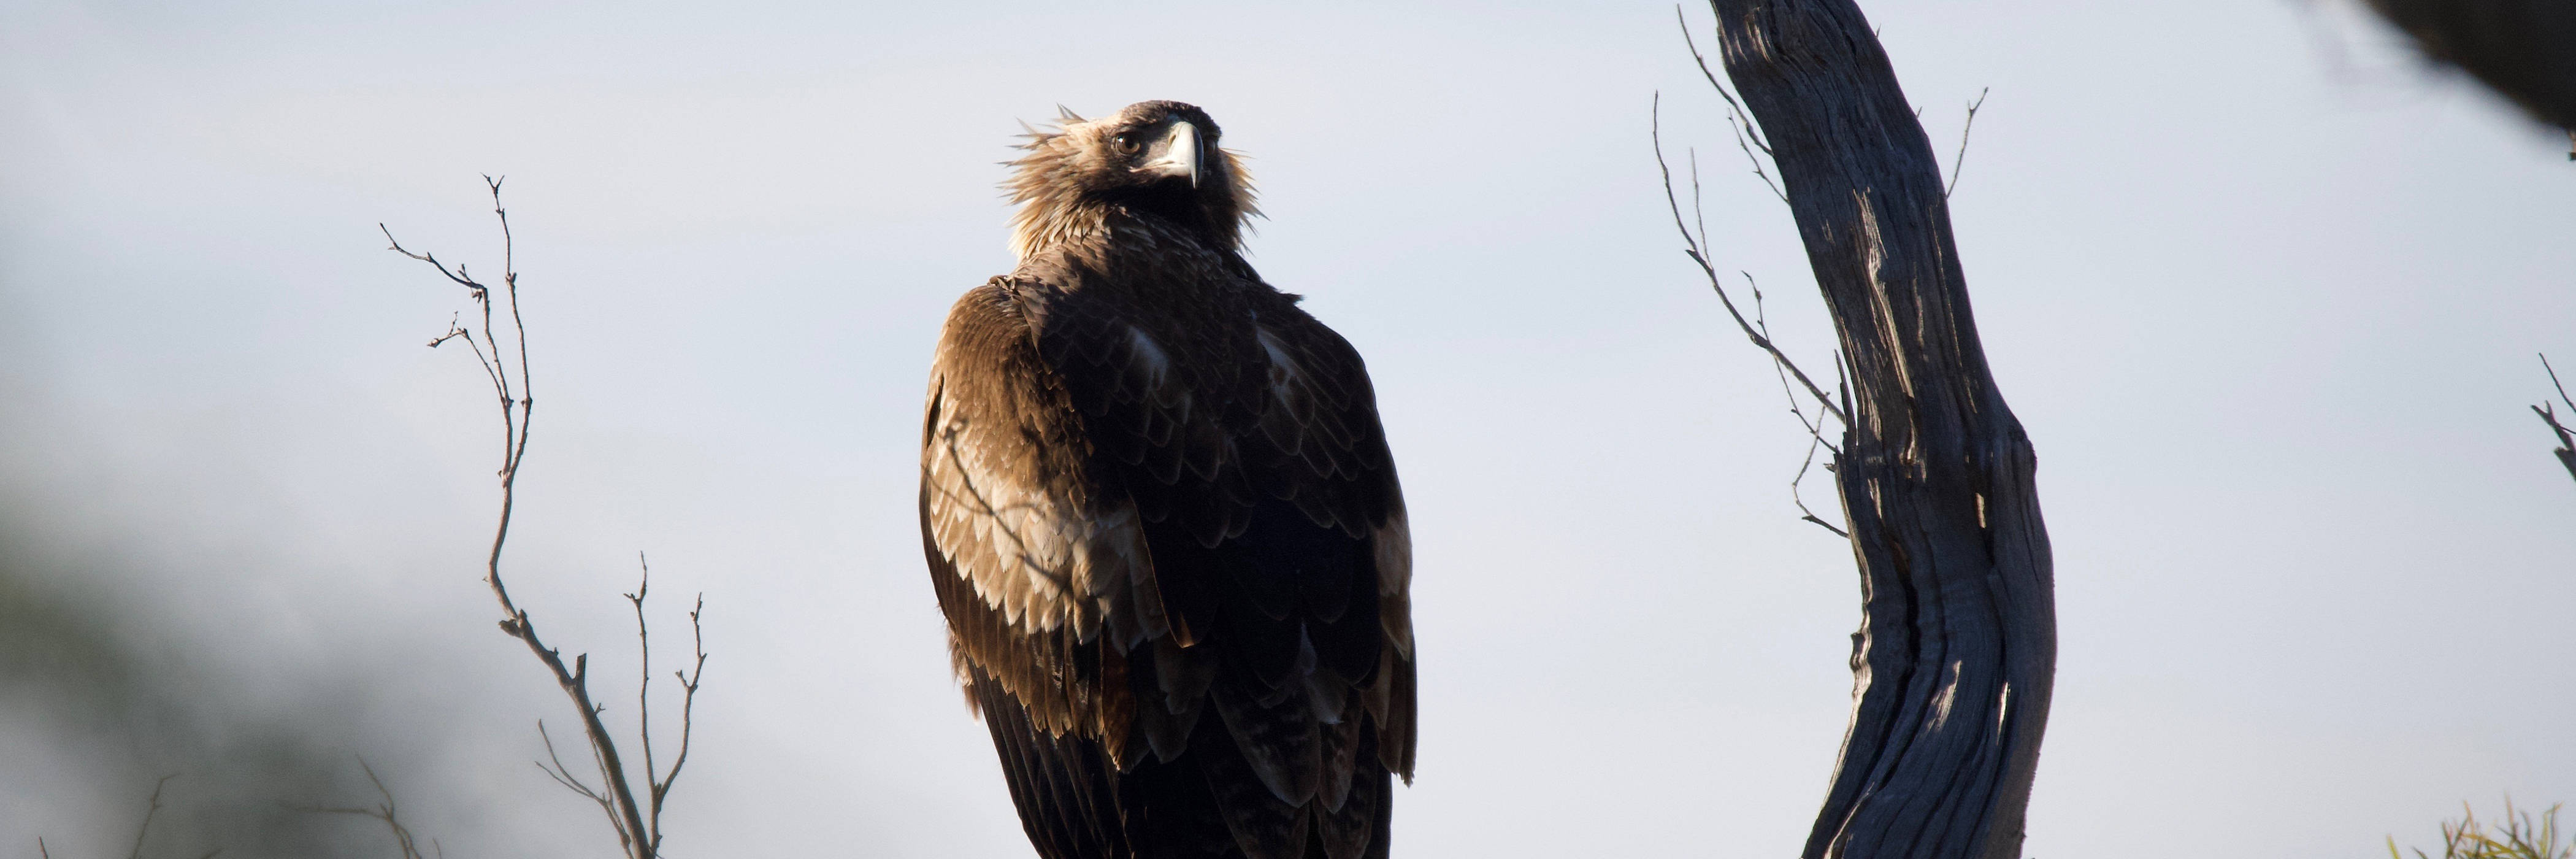 Close view of a wedge-tailed eagle perched on a dead branch, backlit against a pale blue sky. It has its back to us, but its head is turned fully round to stare at the camera. Photo: Peter Vaughan.